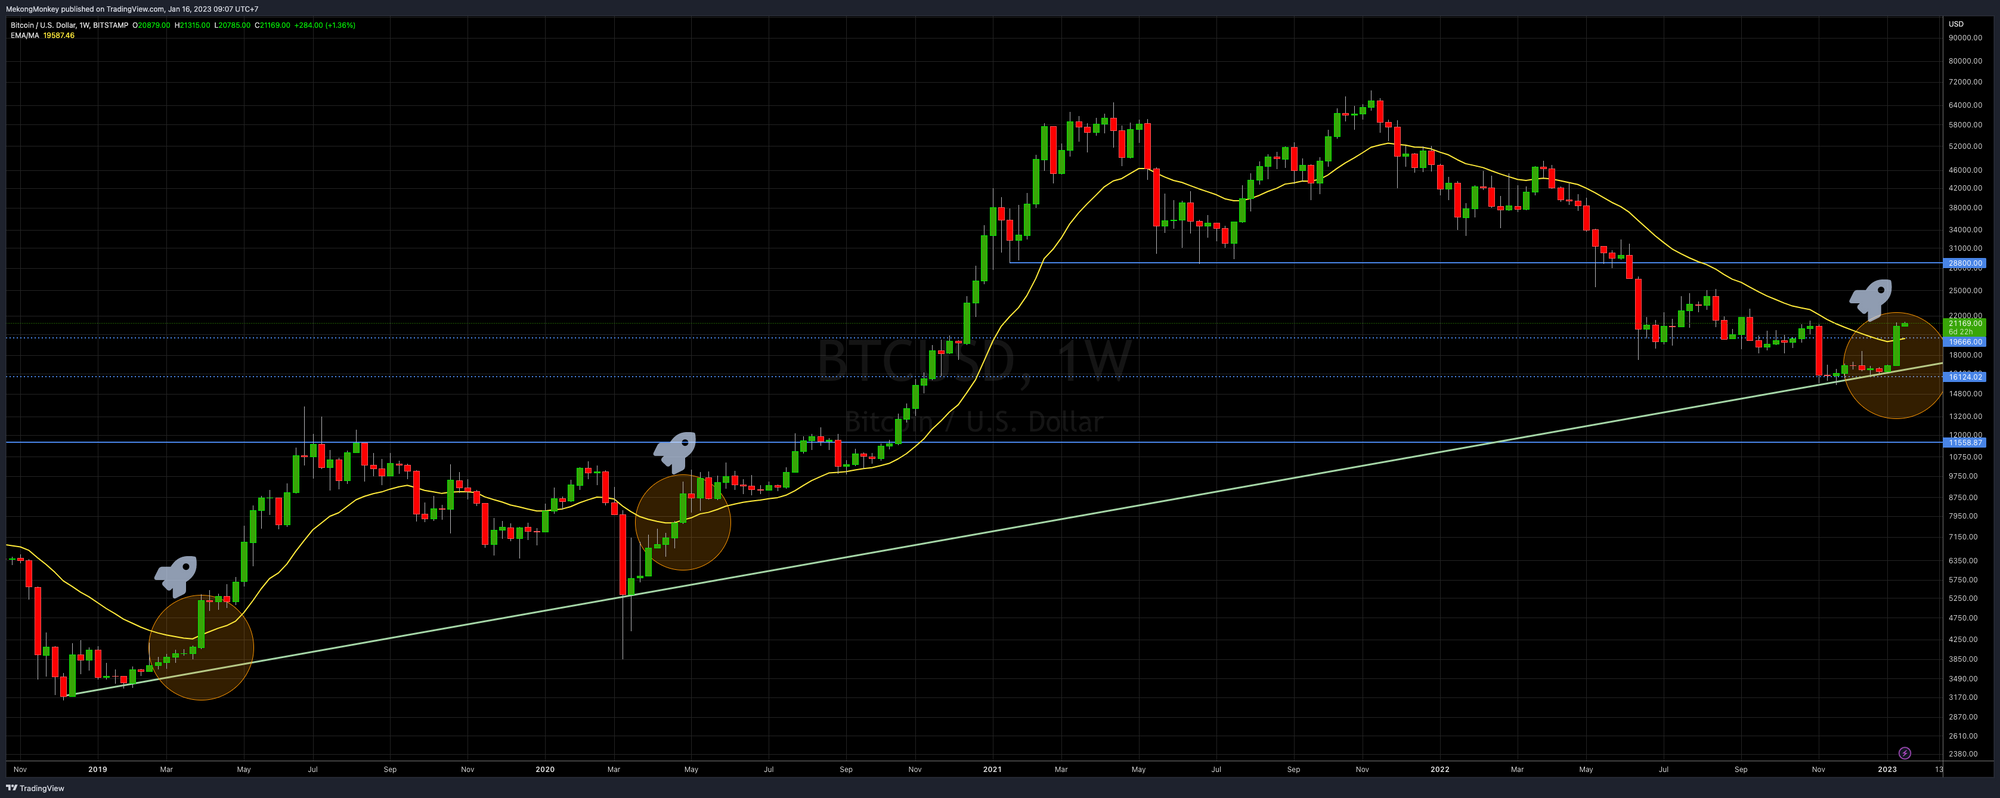 BTCUSD, the weekly chart